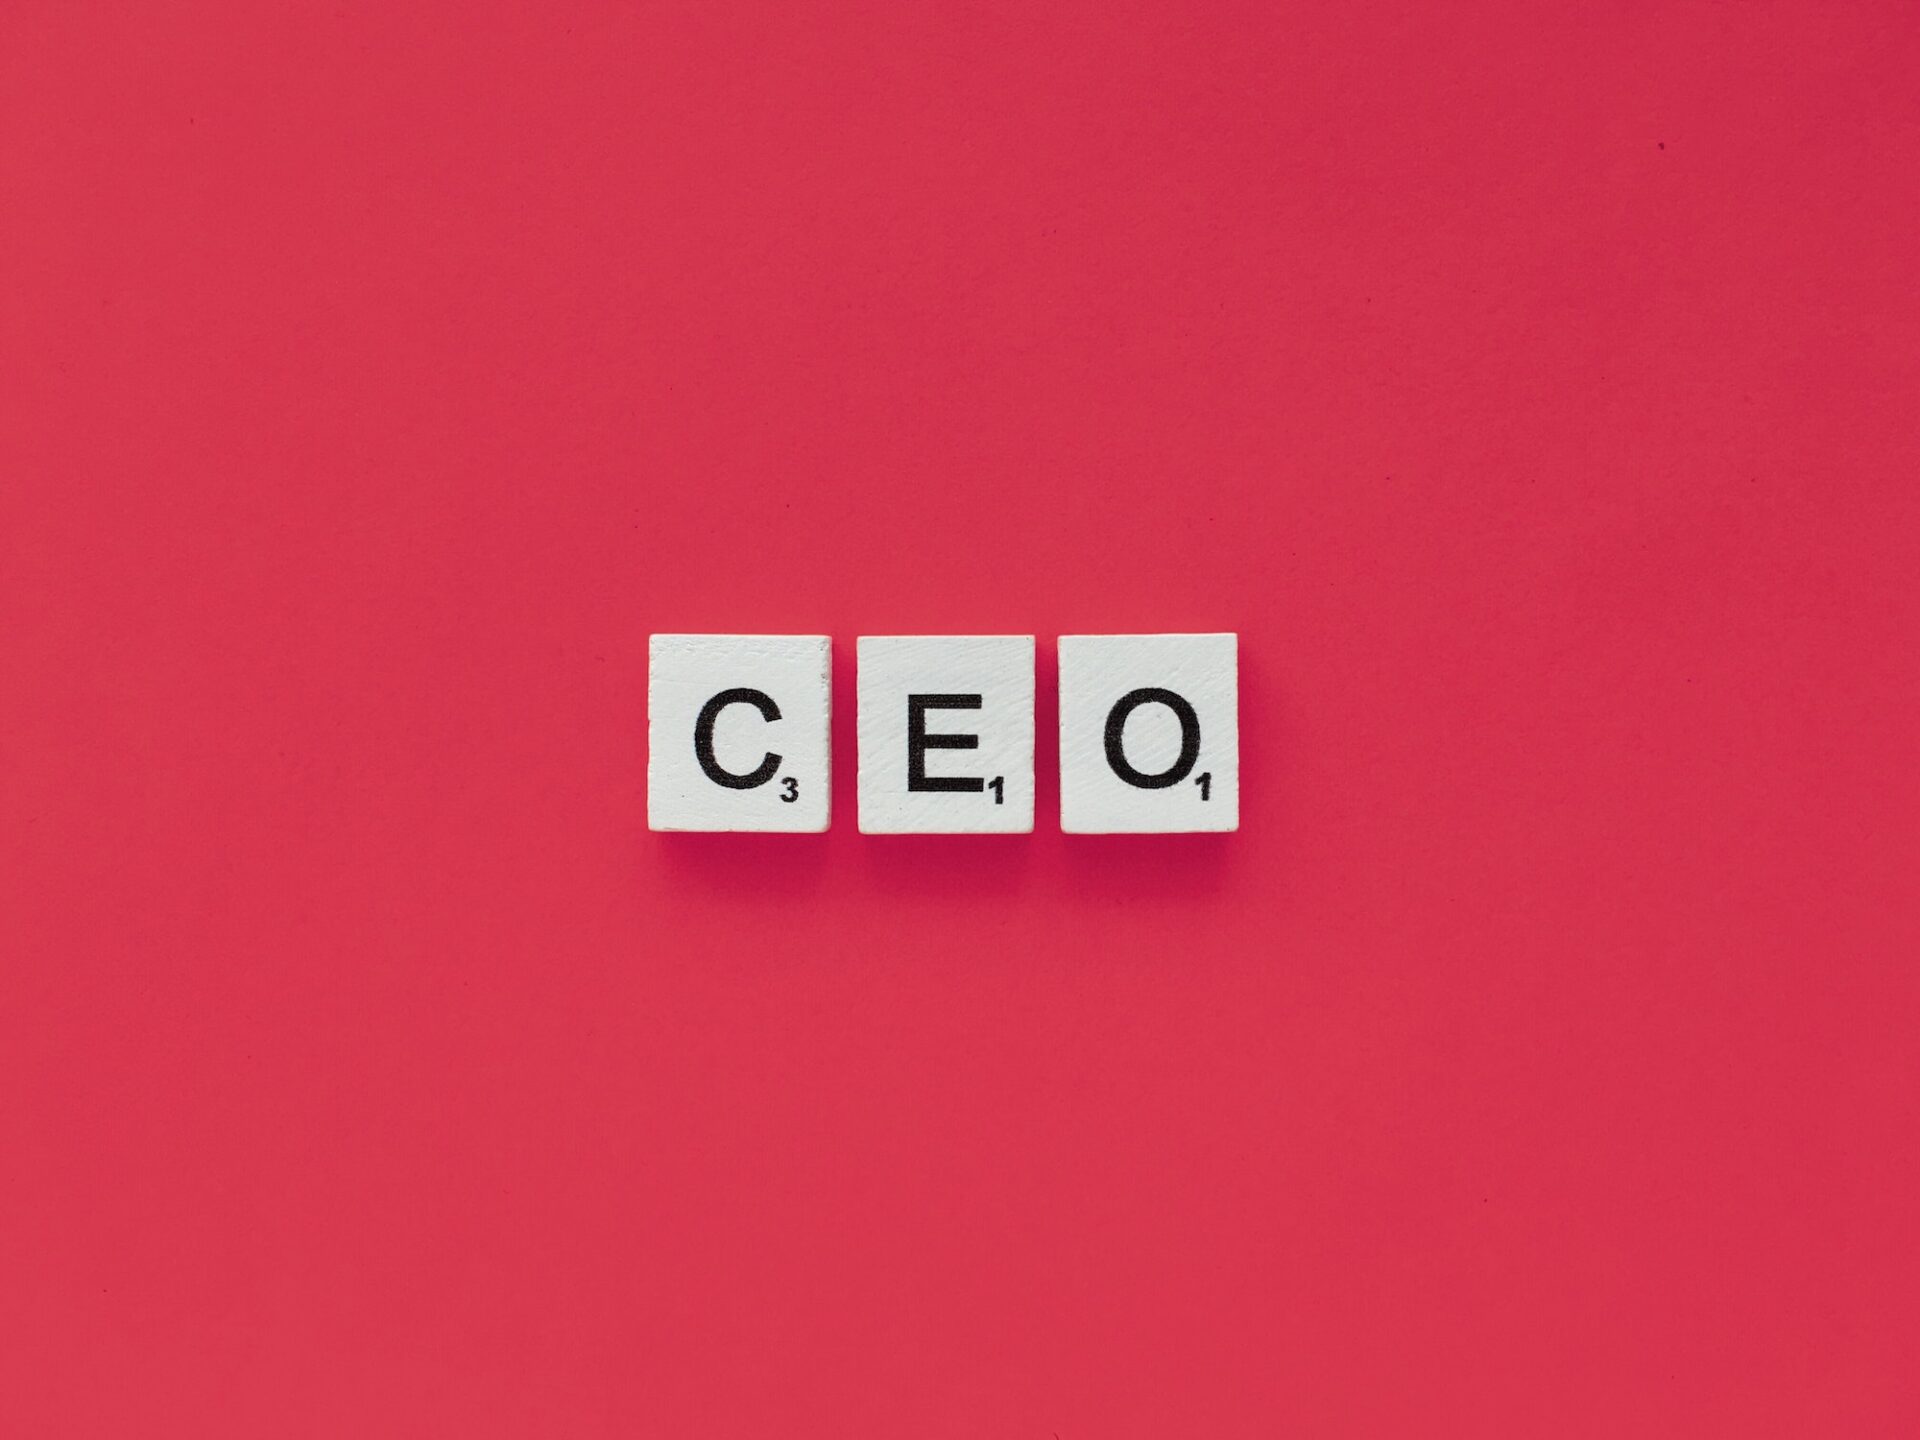 CEO scrabble letters word on a pink background